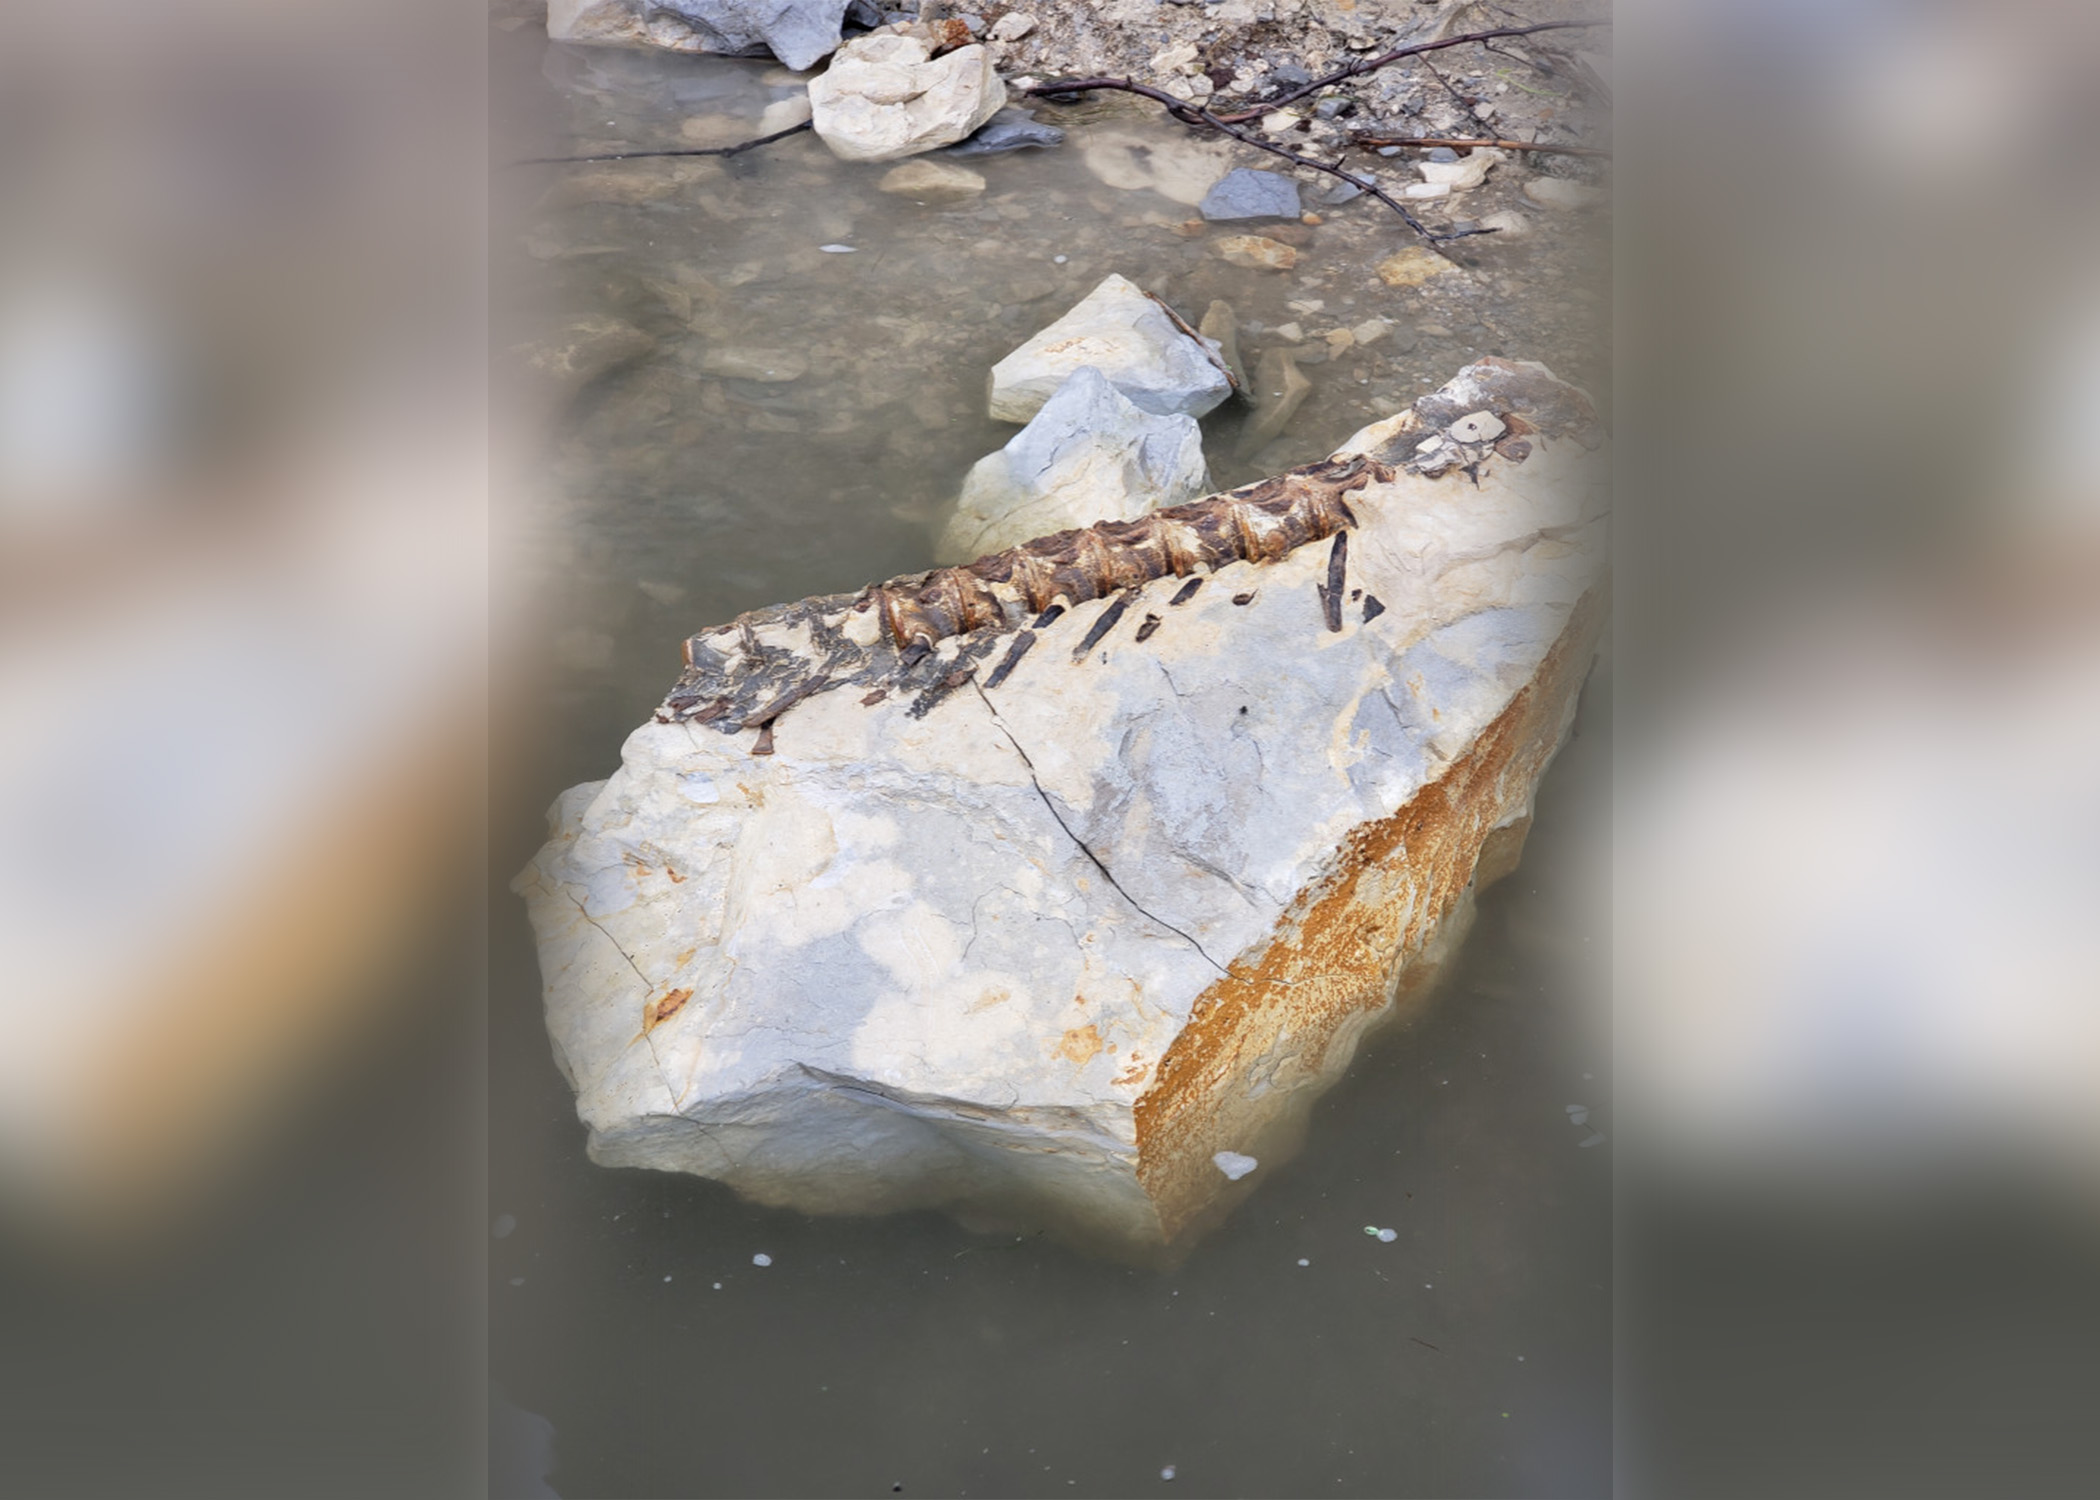 Kayak Fisherman Snags 90-Million-Year-Old Fish Fossil in Missouri River |  Outdoor Life